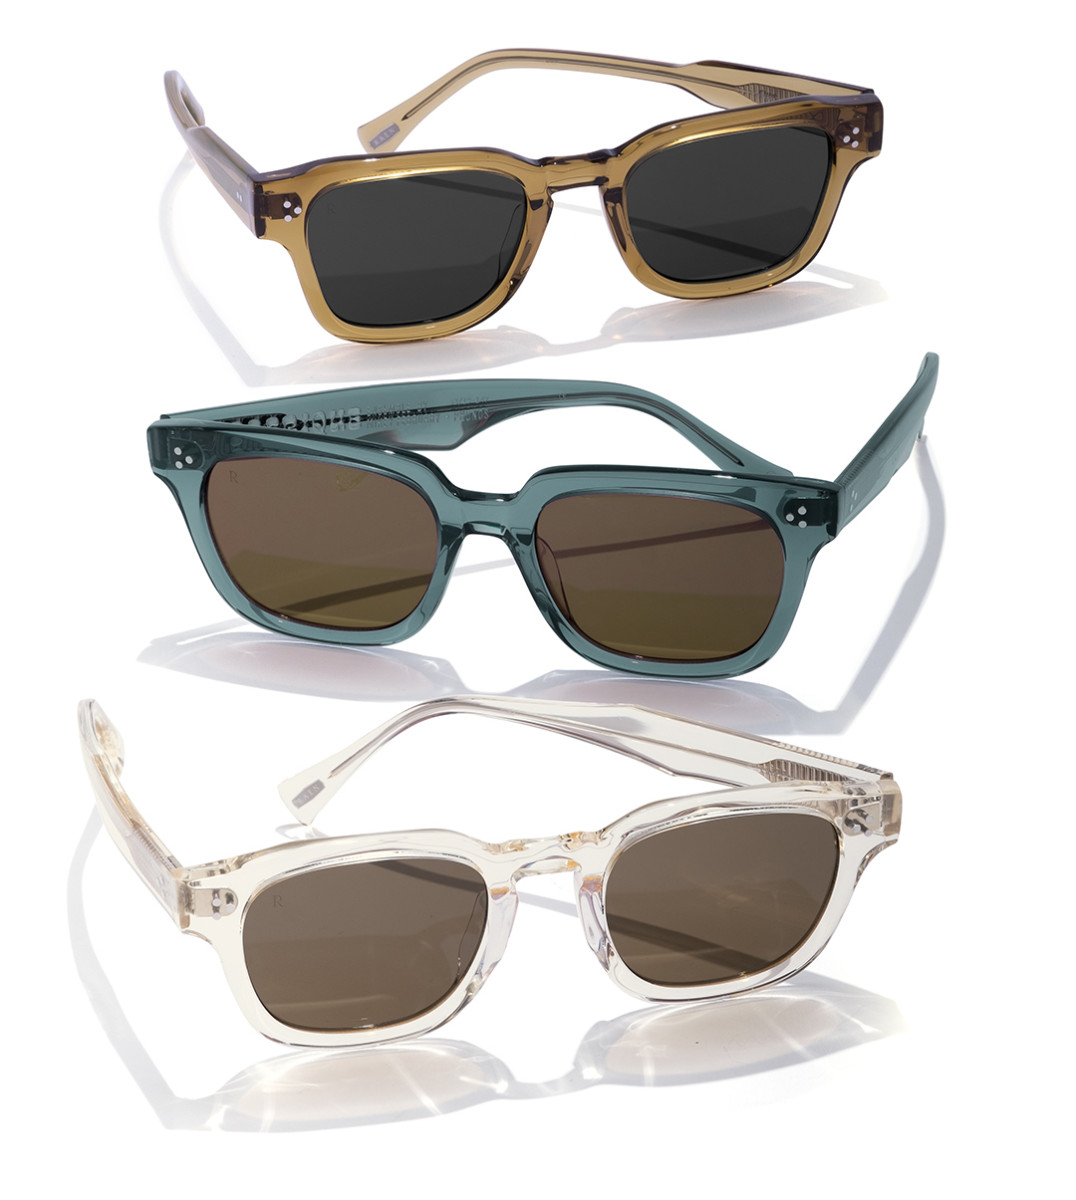 Raen launches a new collection of eyewear made out of Mazzucchelli M49 ...